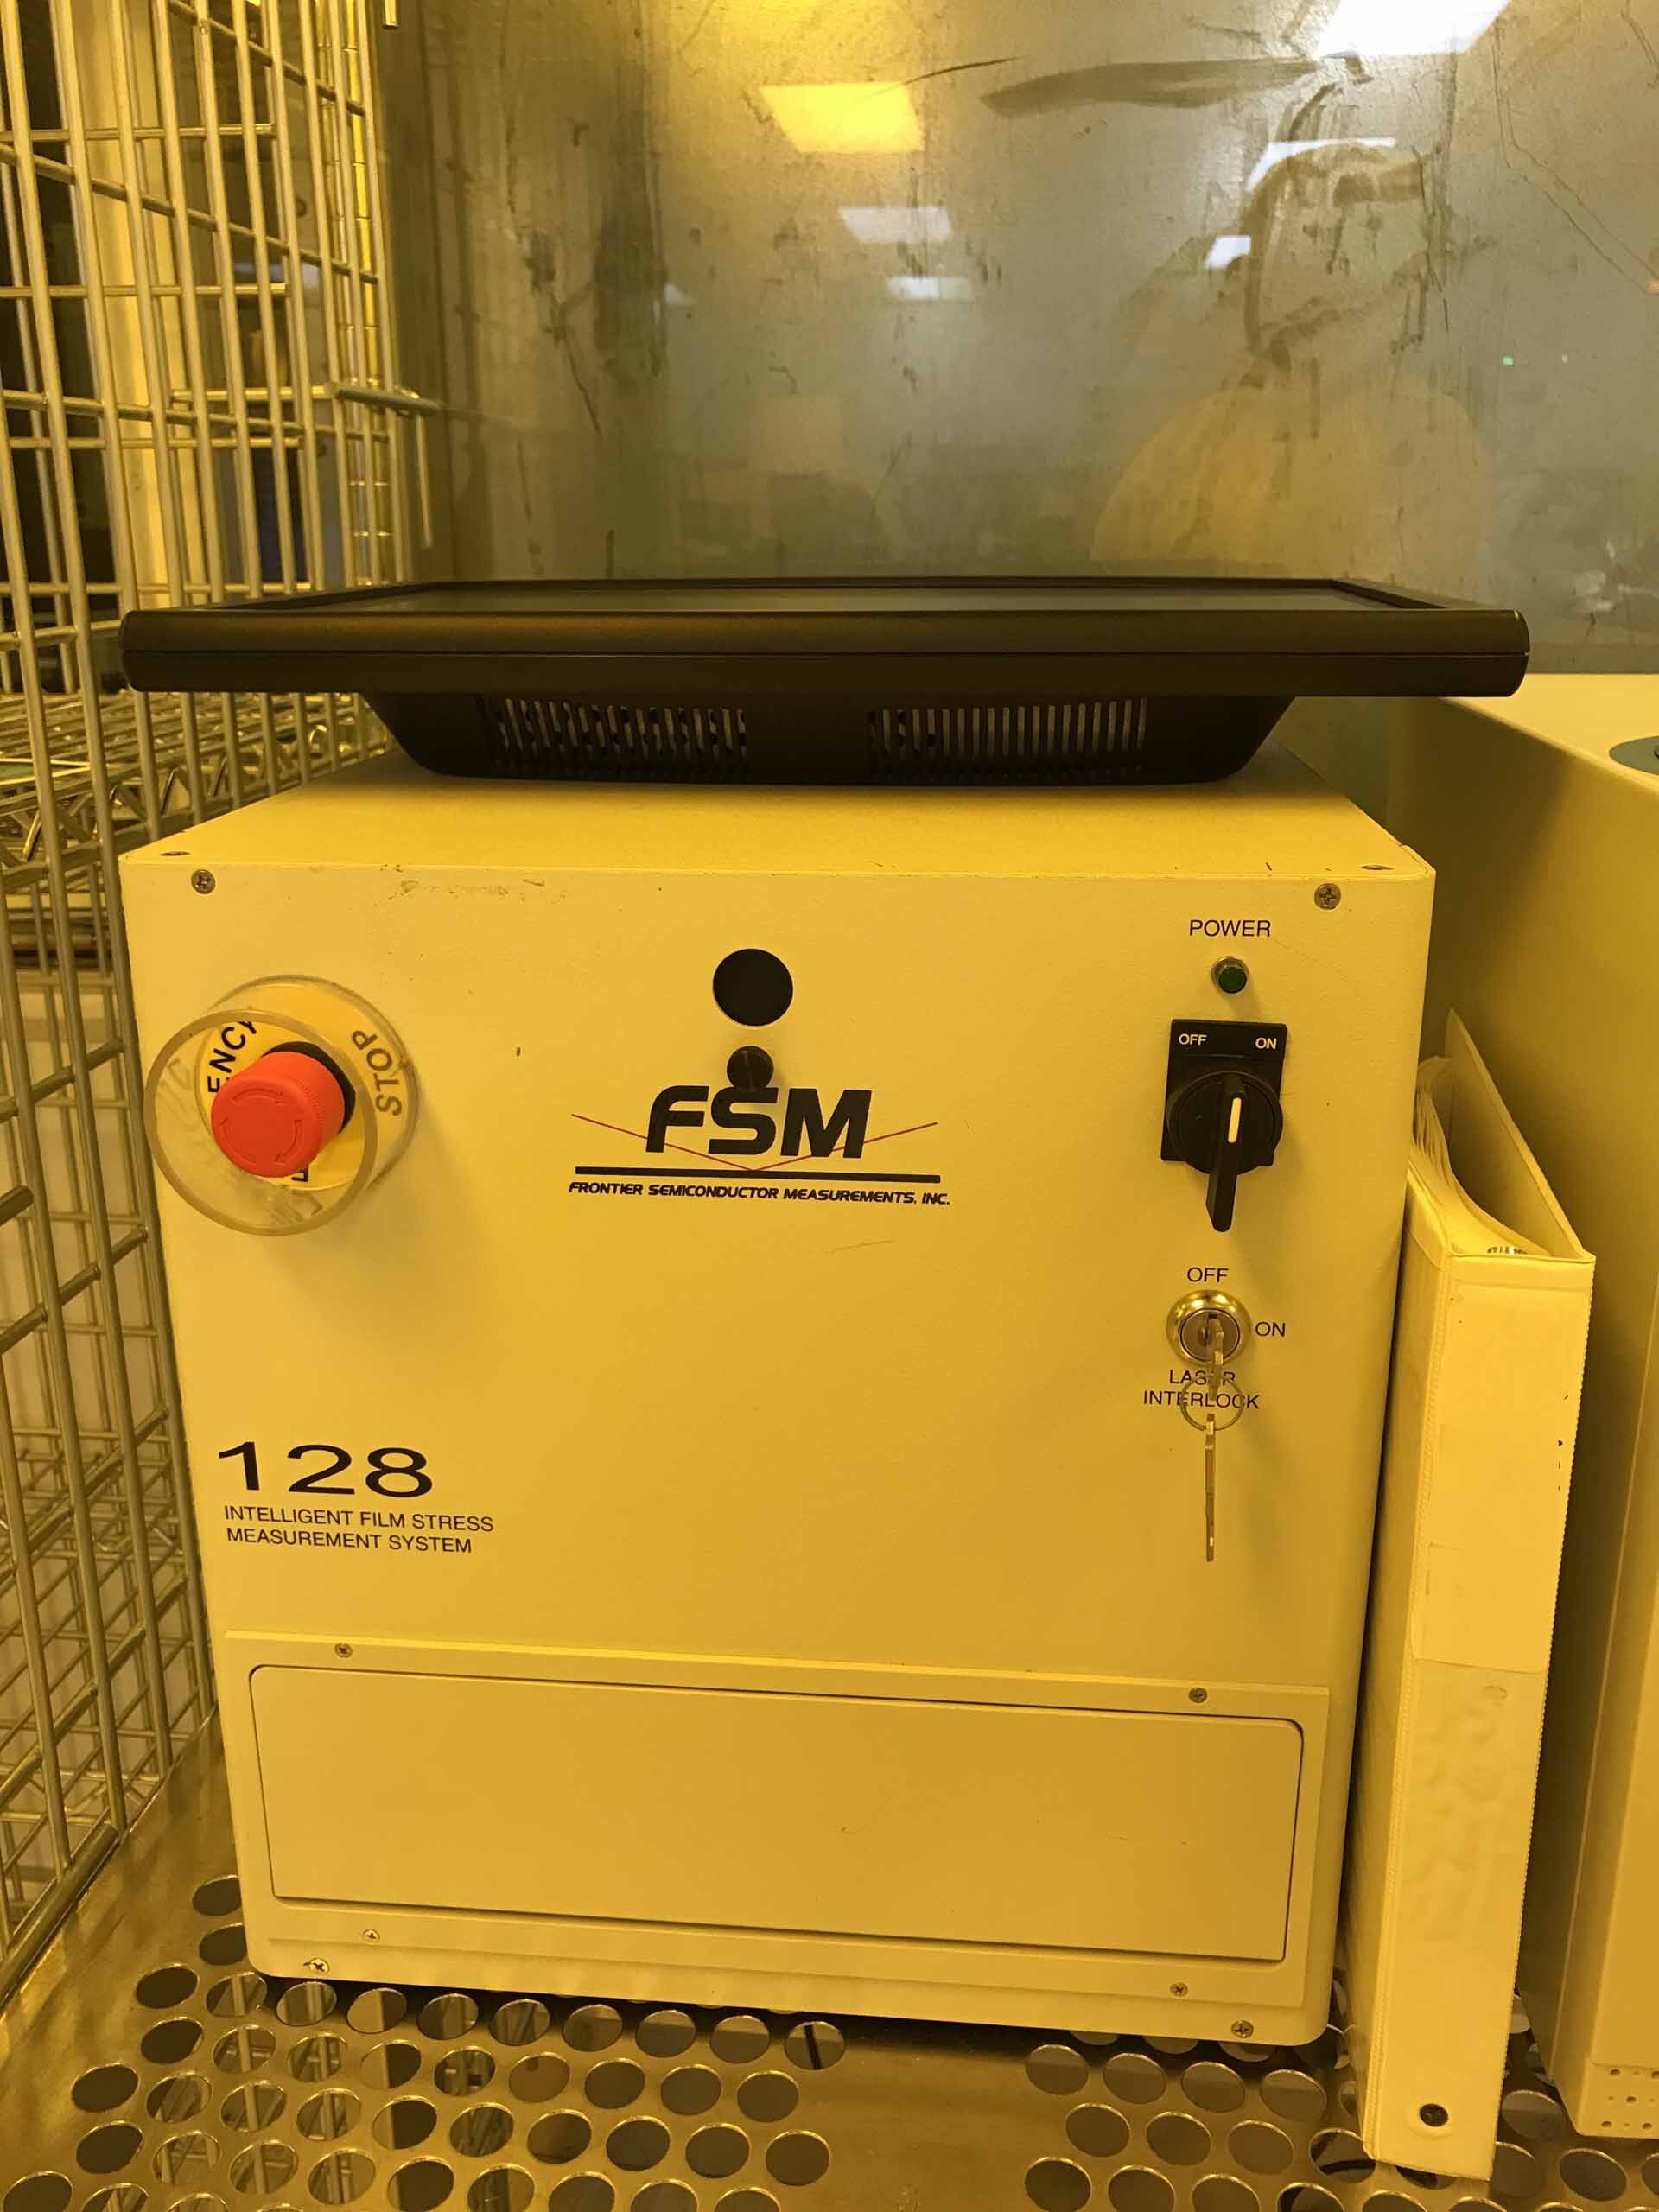 Photo Used FSM / FRONTIER SEMICONDUCTOR 128 For Sale